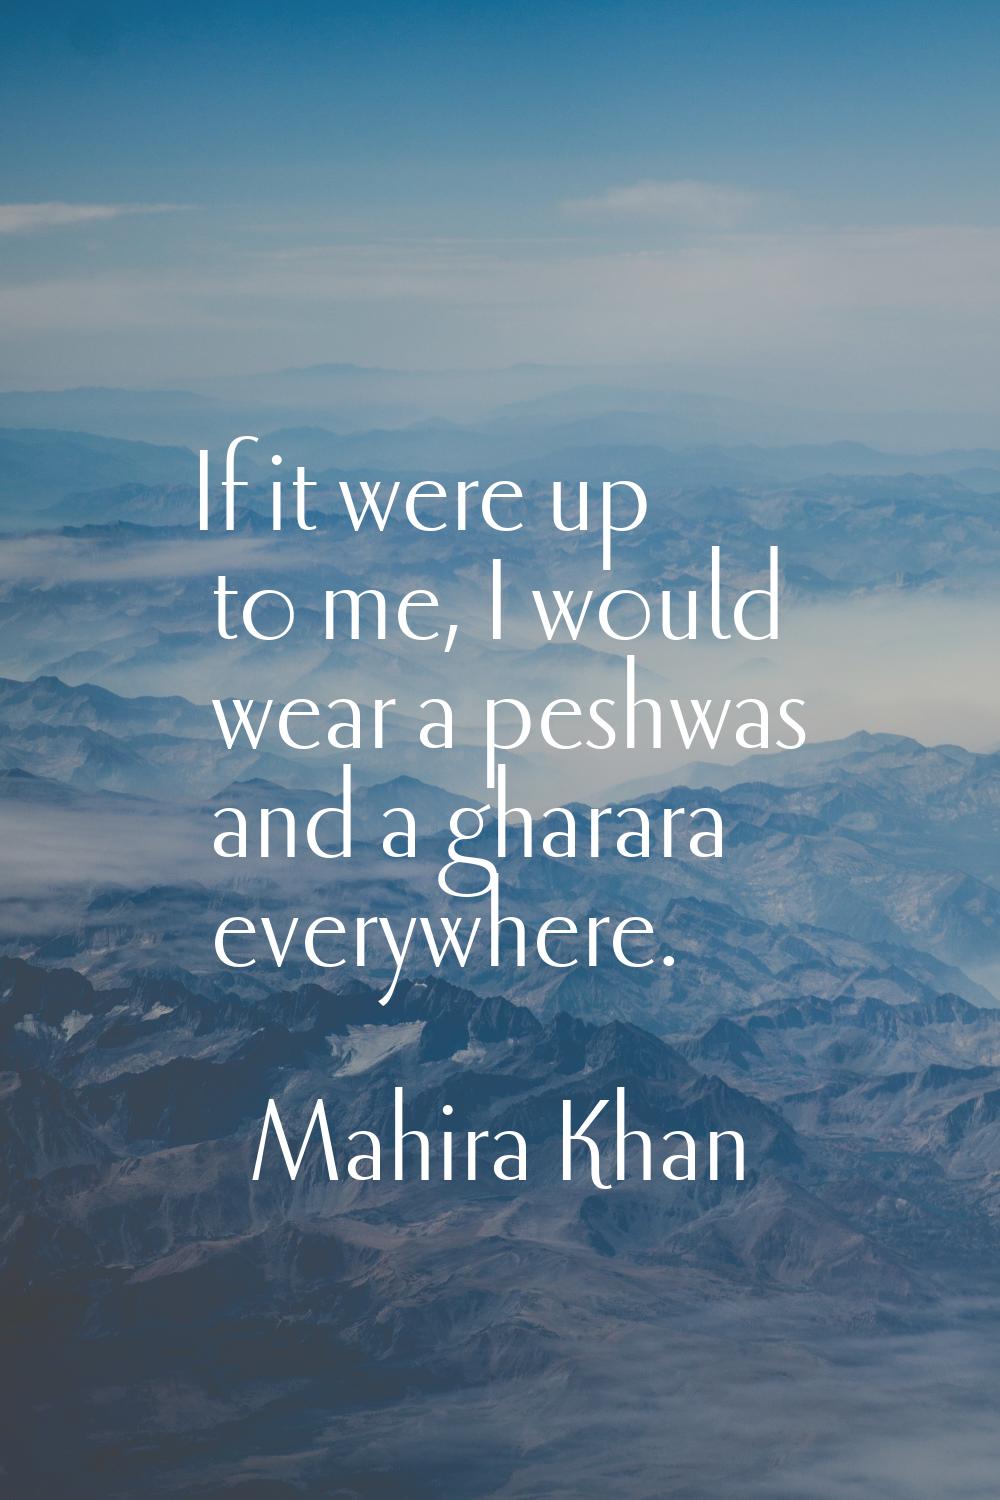 If it were up to me, I would wear a peshwas and a gharara everywhere.